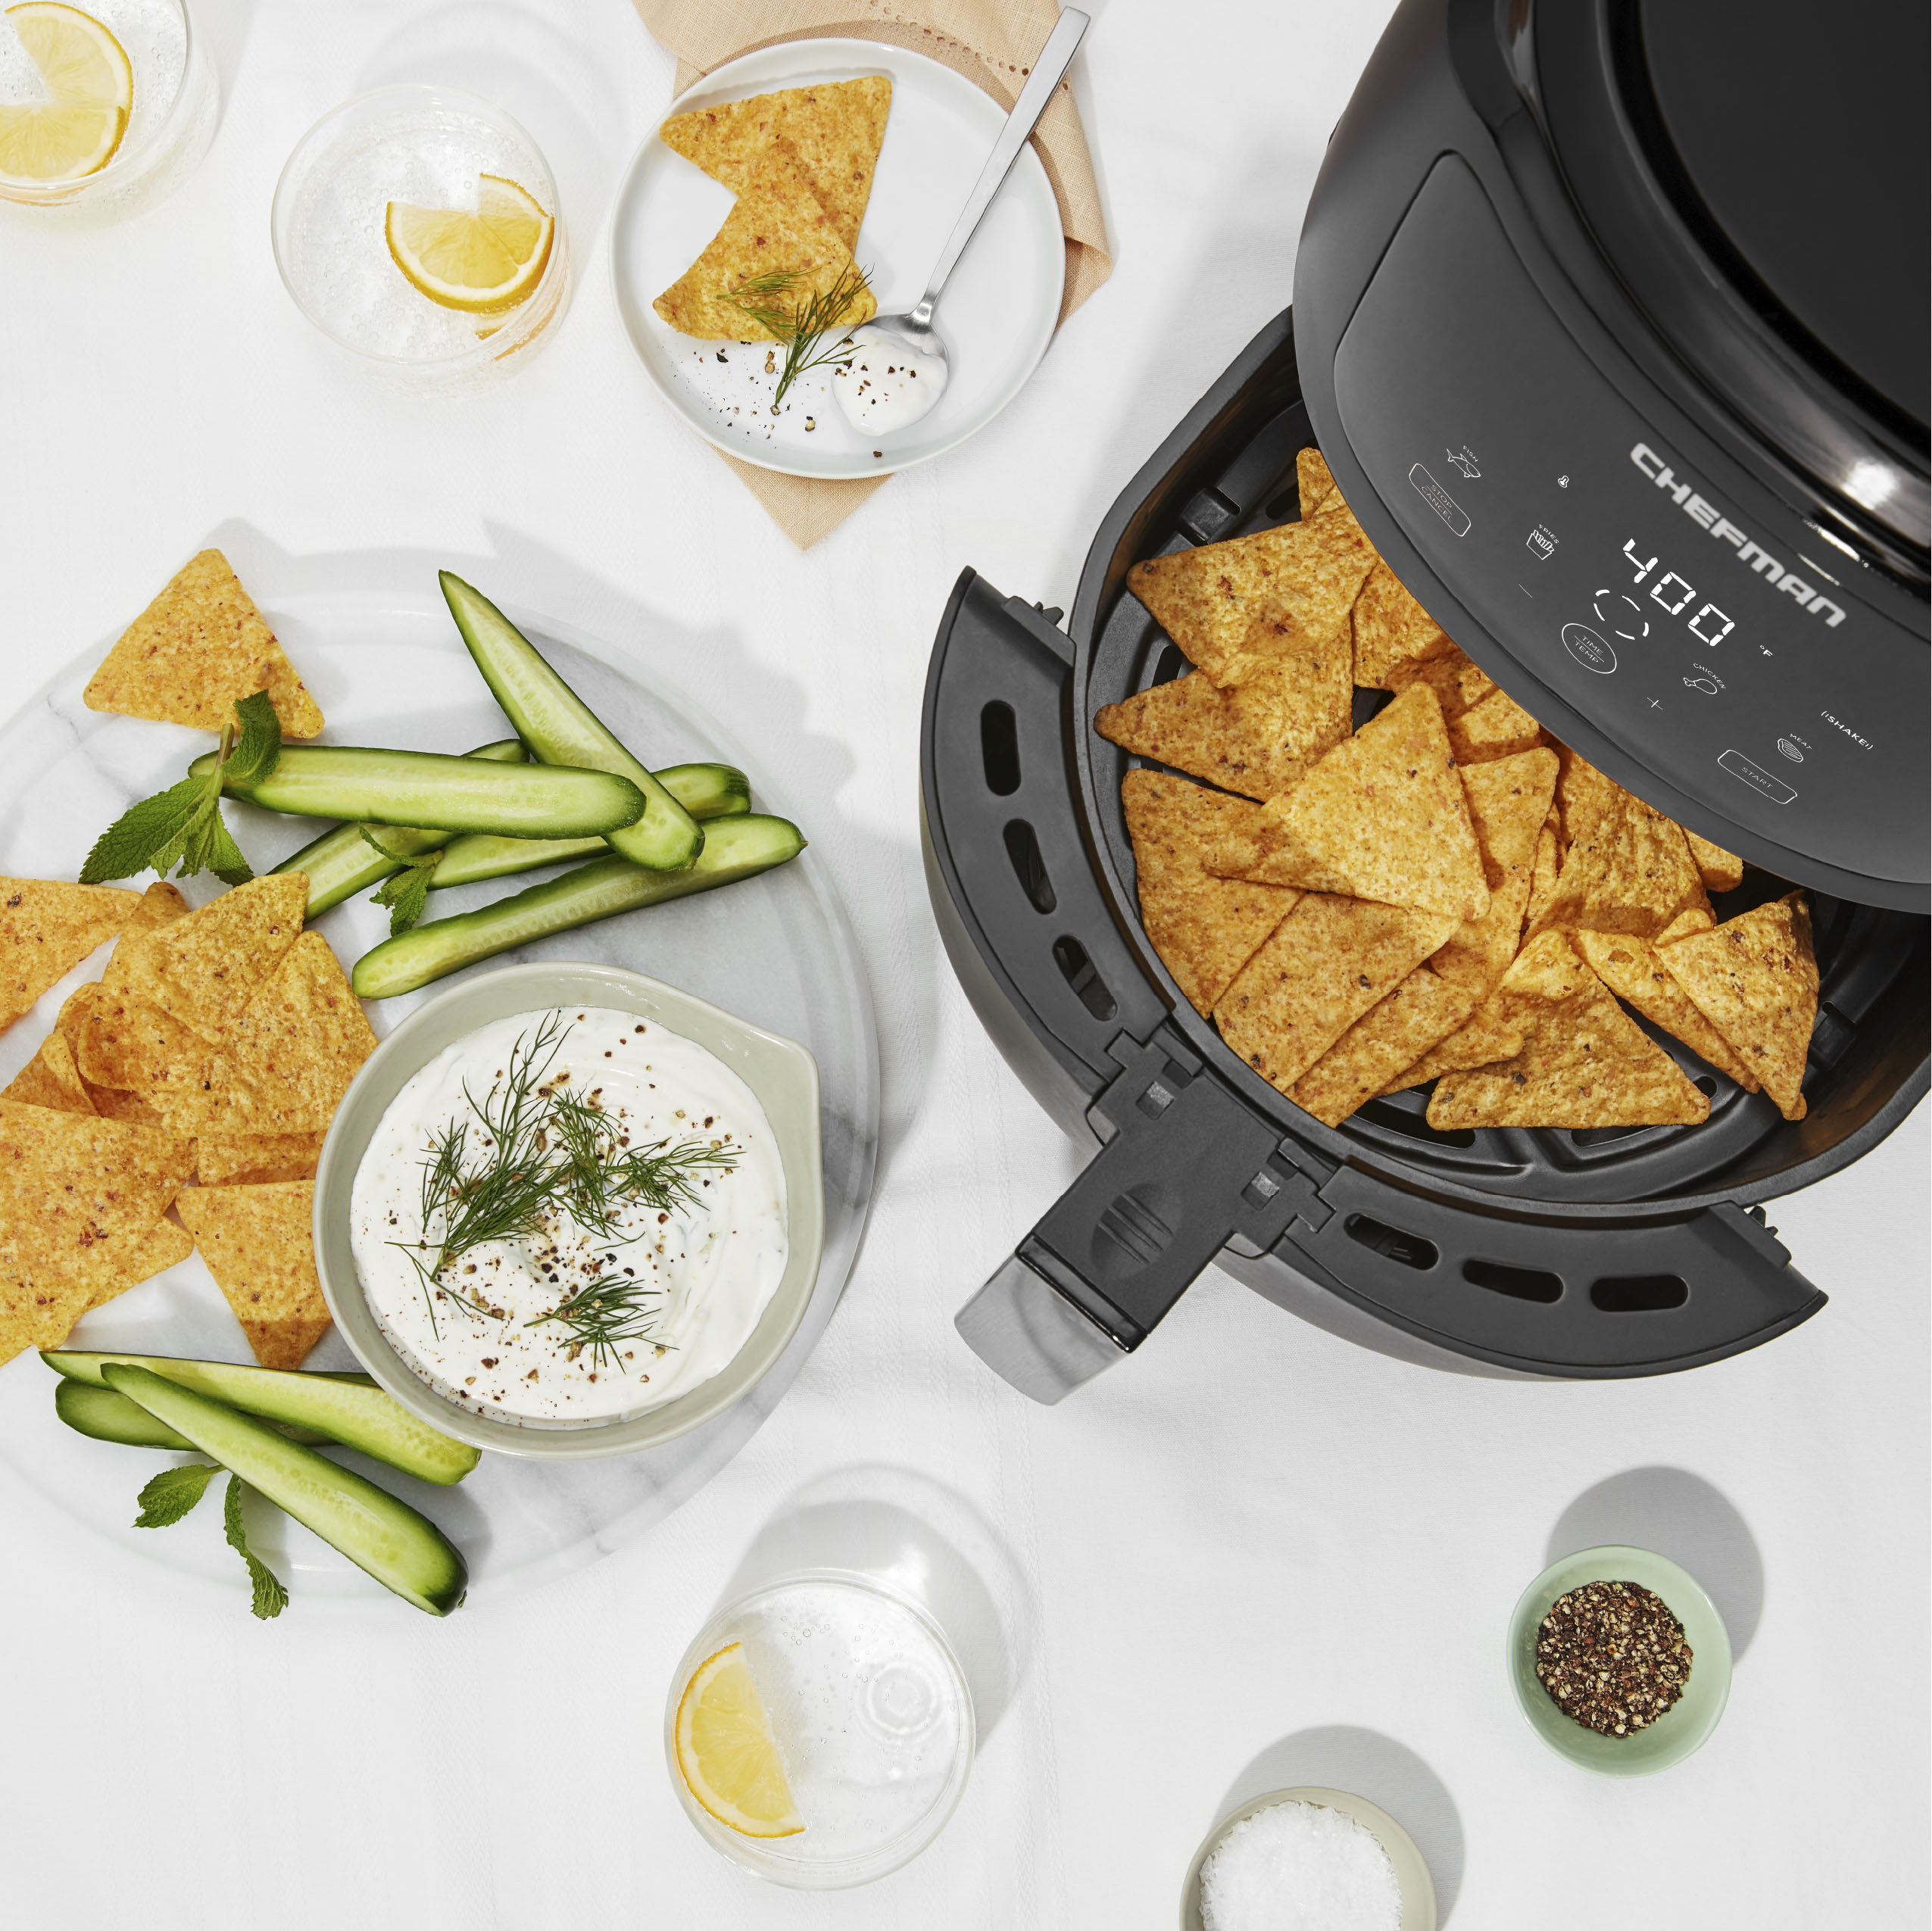 Chefman Family Size 5 Qt. Digital Air Fryer with 4 Cooking Presets - Black $34.99